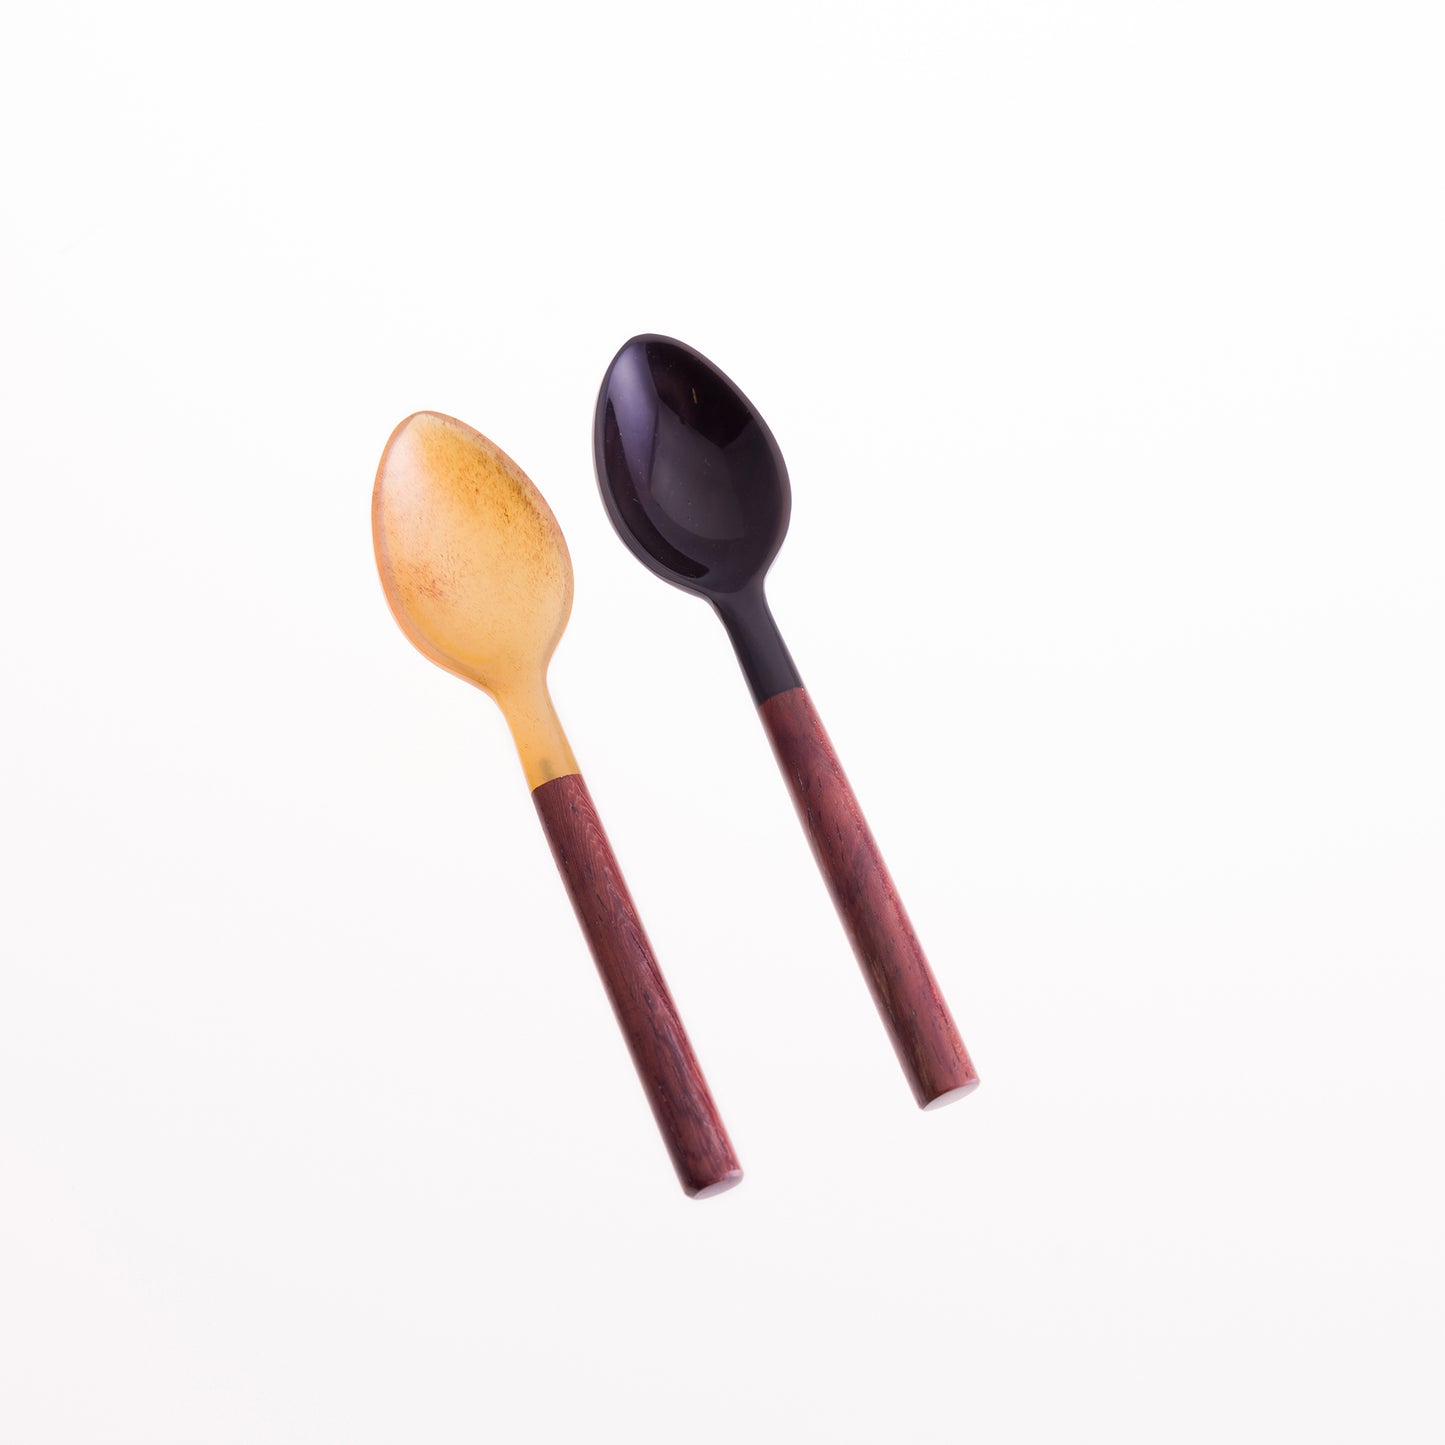 Horn Egg Spoon with Rosewood Handle